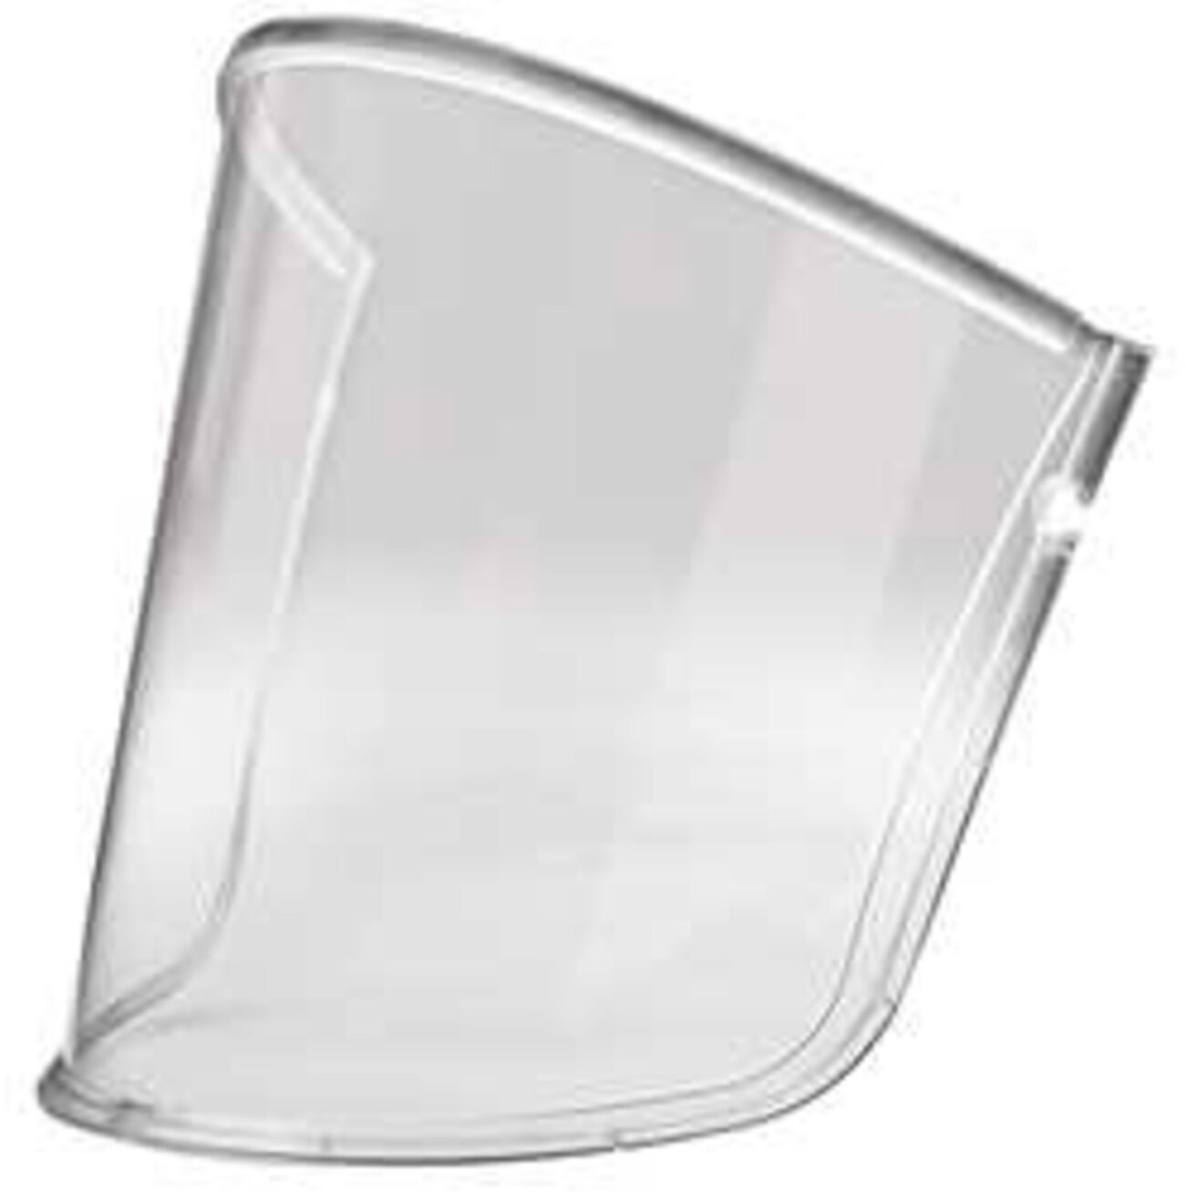 3M Versaflo replacement visor coated (scratch and chemical resistant) M927 for M series